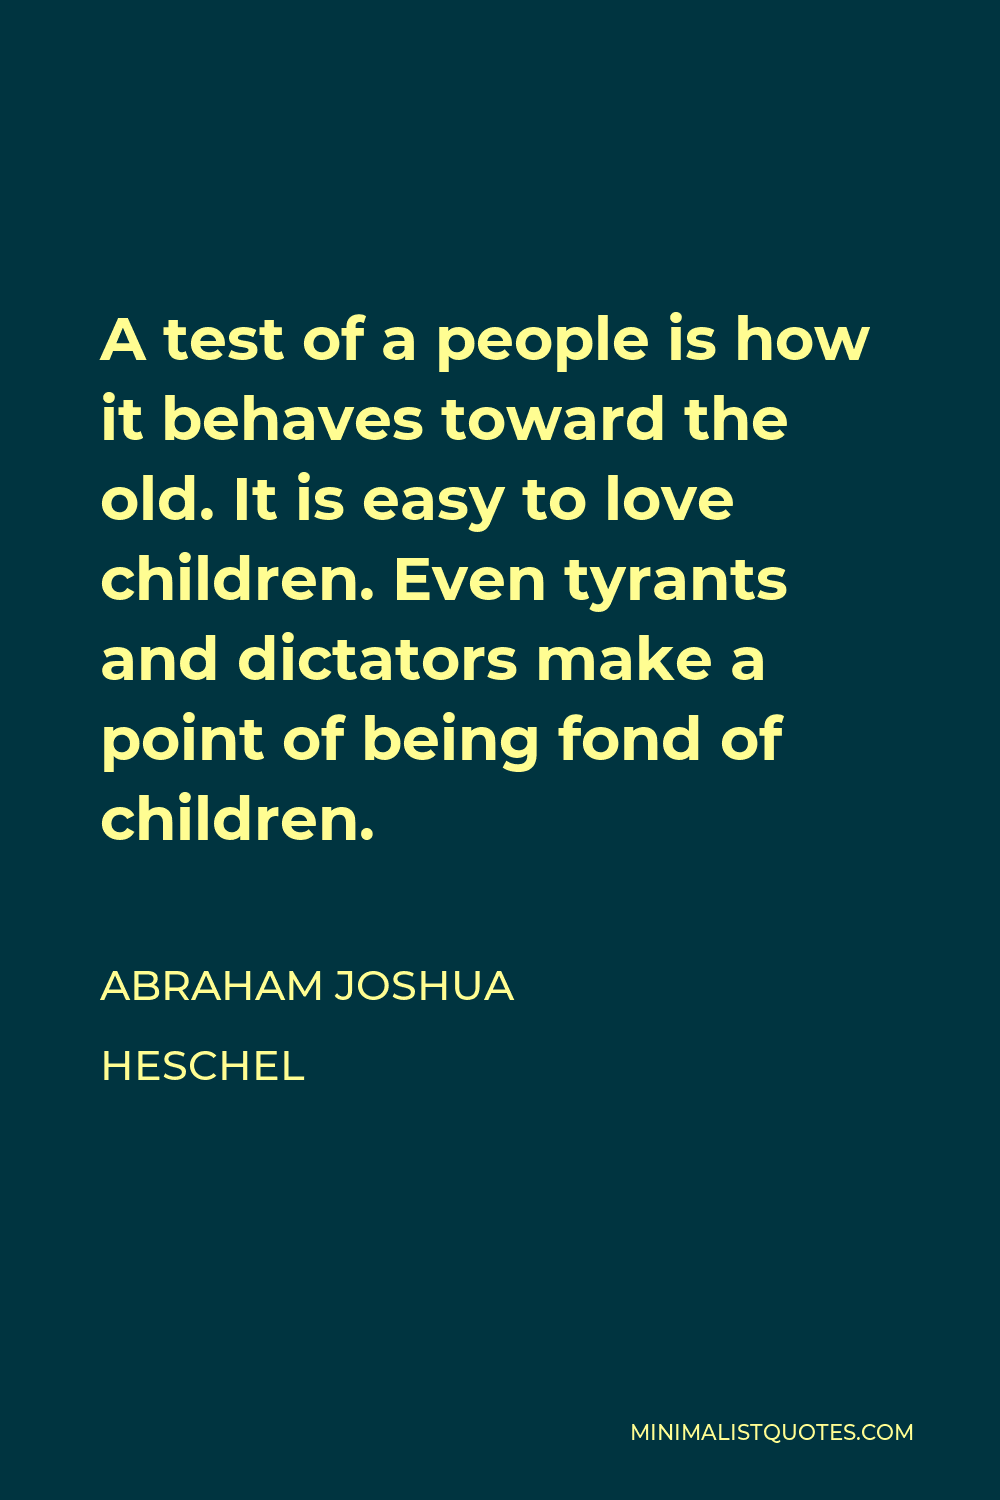 Abraham Joshua Heschel Quote - A test of a people is how it behaves toward the old. It is easy to love children. Even tyrants and dictators make a point of being fond of children.